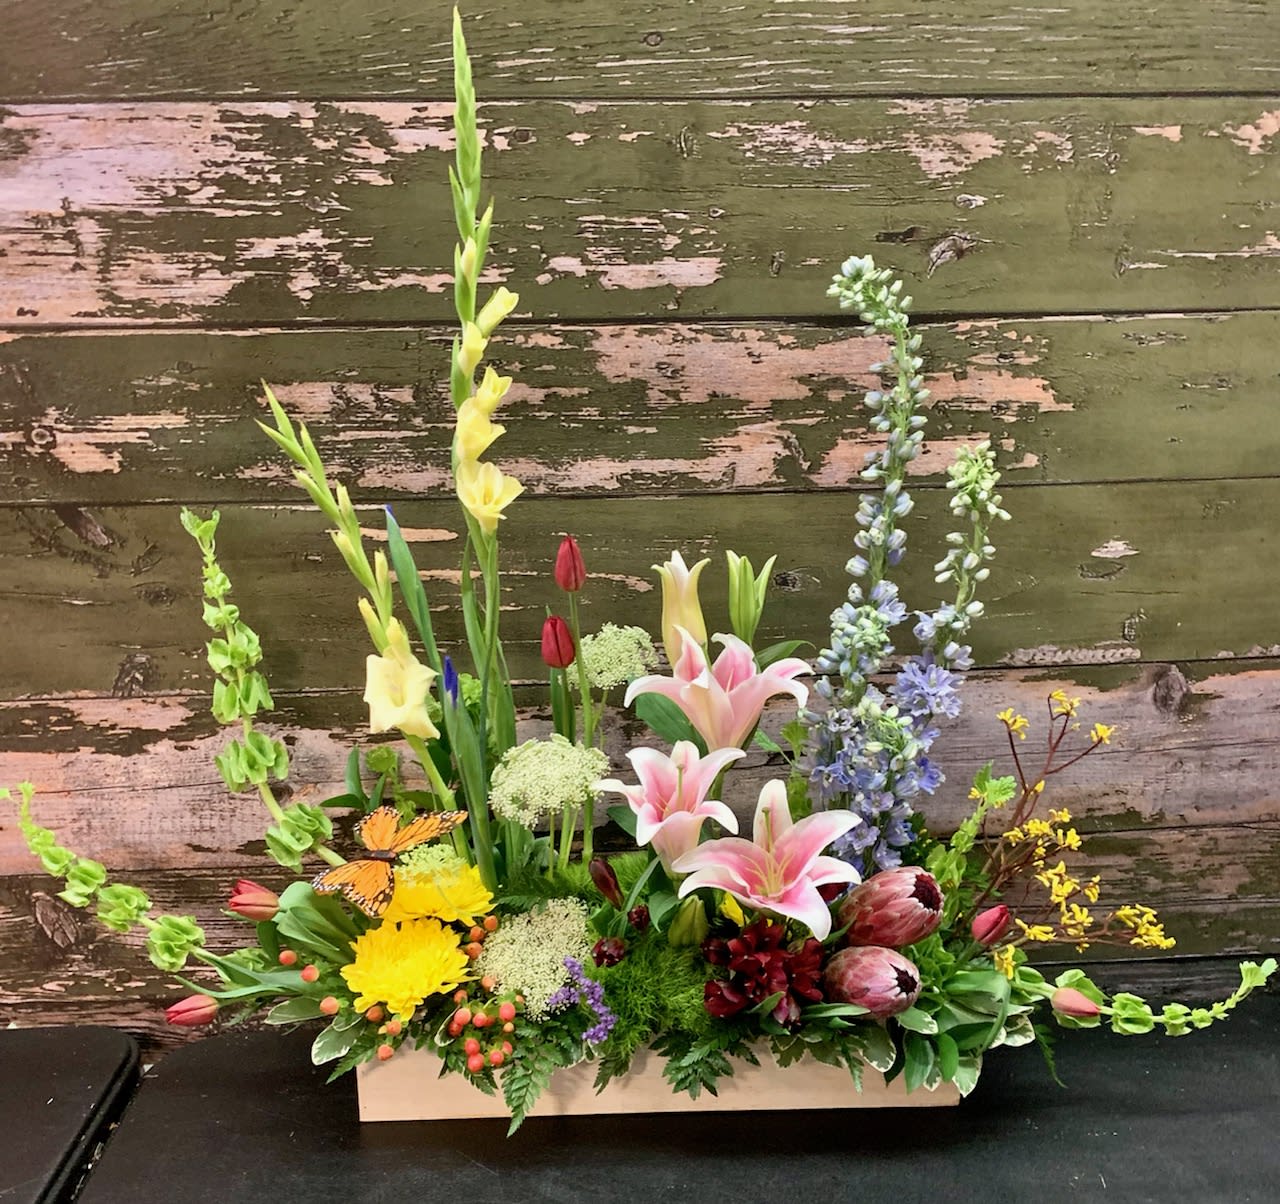 Grande Garden   -  The Perfect Gift For Any Occasion! This Large And Showy Mixed Flower Garden Arrives in a Reuseable Wooden Planter.